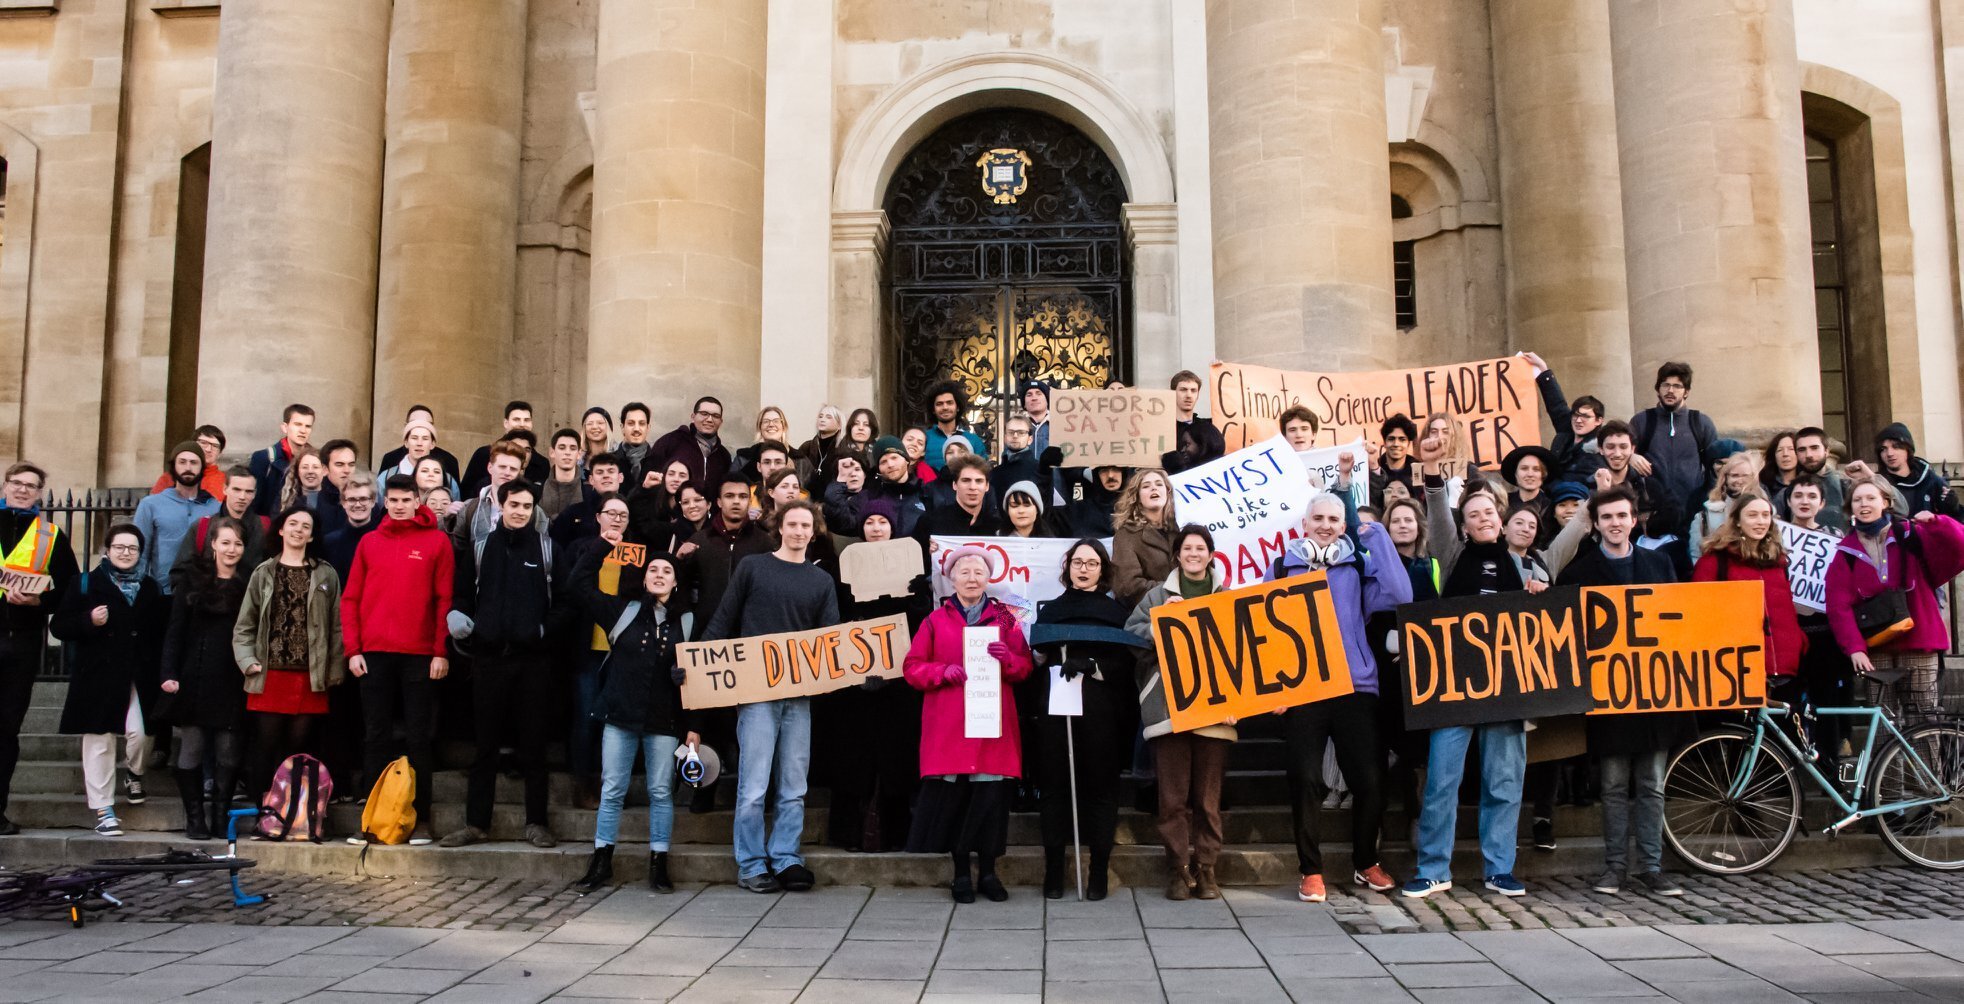 Many people outside an Oxford building holding signs calling for divestment, disarming and decolonisation.